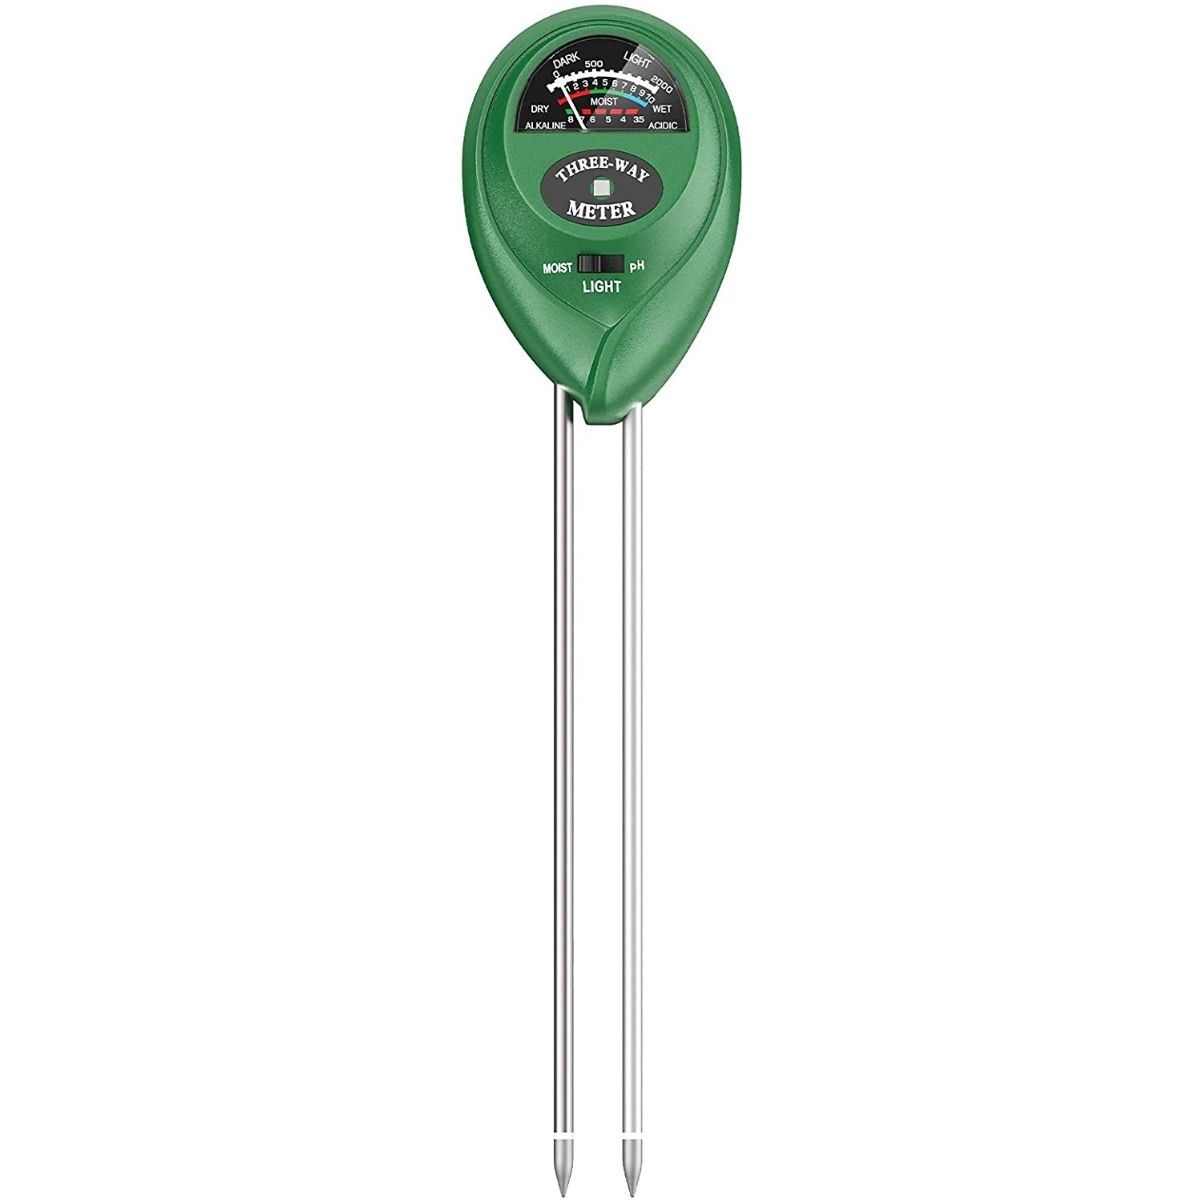 The Gifts for Gardeners Option: Atree Soil pH Meter